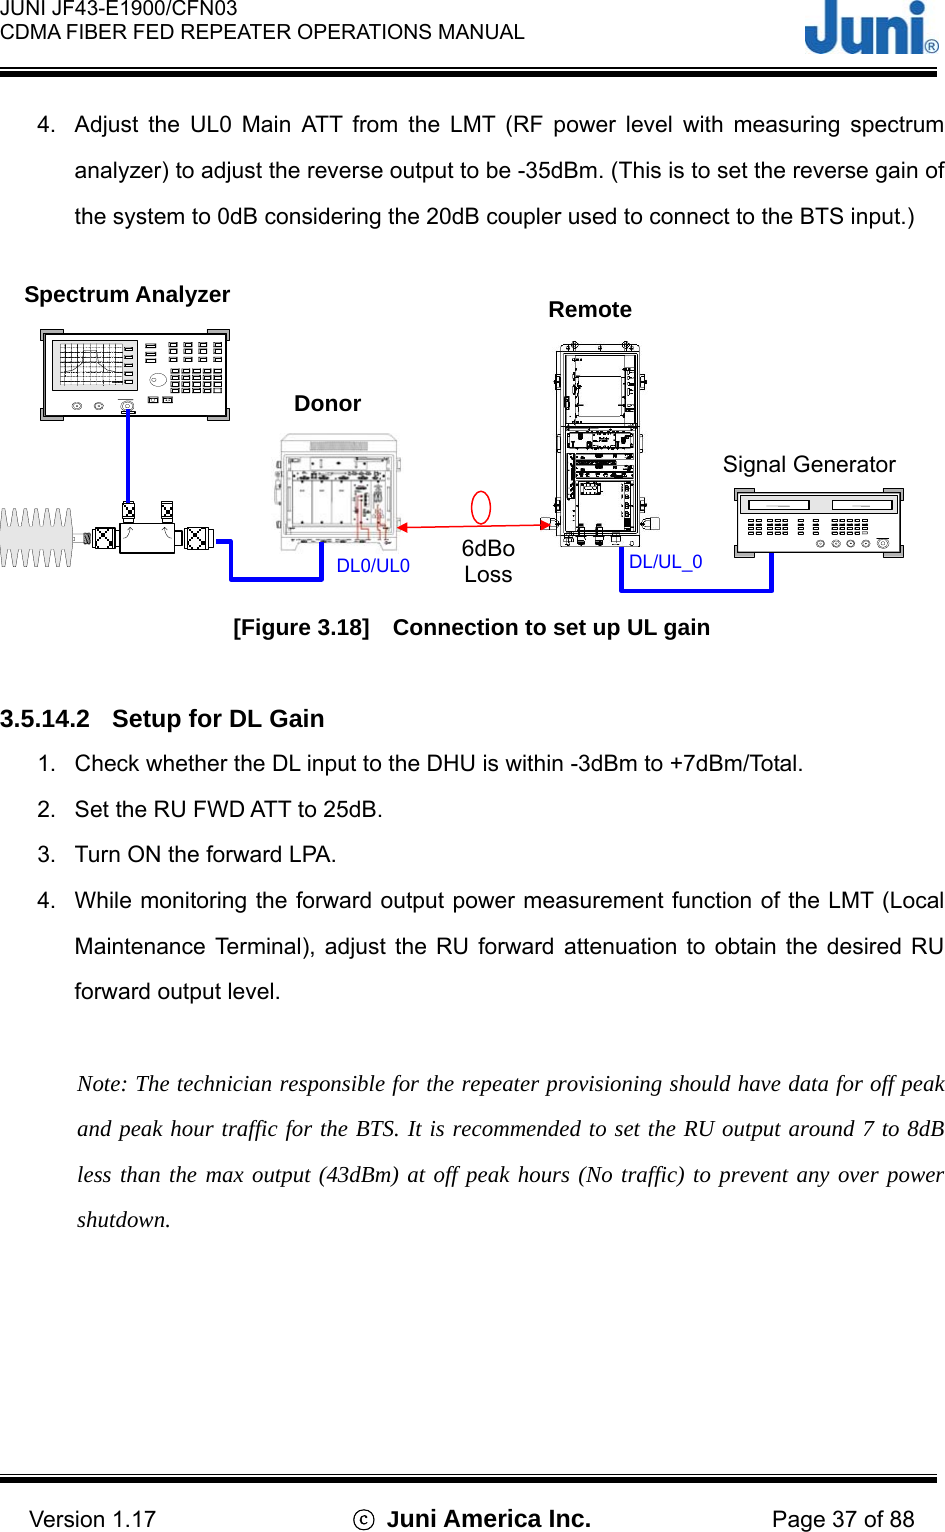  JUNI JF43-E1900/CFN03 CDMA FIBER FED REPEATER OPERATIONS MANUAL                                    Version 1.17  ⓒ Juni America Inc. Page 37 of 88 4.  Adjust the UL0 Main ATT from the LMT (RF power level with measuring spectrum analyzer) to adjust the reverse output to be -35dBm. (This is to set the reverse gain of the system to 0dB considering the 20dB coupler used to connect to the BTS input.)  [Figure 3.18]    Connection to set up UL gain  3.5.14.2  Setup for DL Gain 1.  Check whether the DL input to the DHU is within -3dBm to +7dBm/Total.   2.  Set the RU FWD ATT to 25dB. 3.  Turn ON the forward LPA. 4.  While monitoring the forward output power measurement function of the LMT (Local Maintenance Terminal), adjust the RU forward attenuation to obtain the desired RU forward output level.  Note: The technician responsible for the repeater provisioning should have data for off peak and peak hour traffic for the BTS. It is recommended to set the RU output around 7 to 8dB less than the max output (43dBm) at off peak hours (No traffic) to prevent any over power shutdown. DL/UL_0DL0/UL0Donor 6dBoLossSignal GeneratorSpectrum Analyzer Remote 